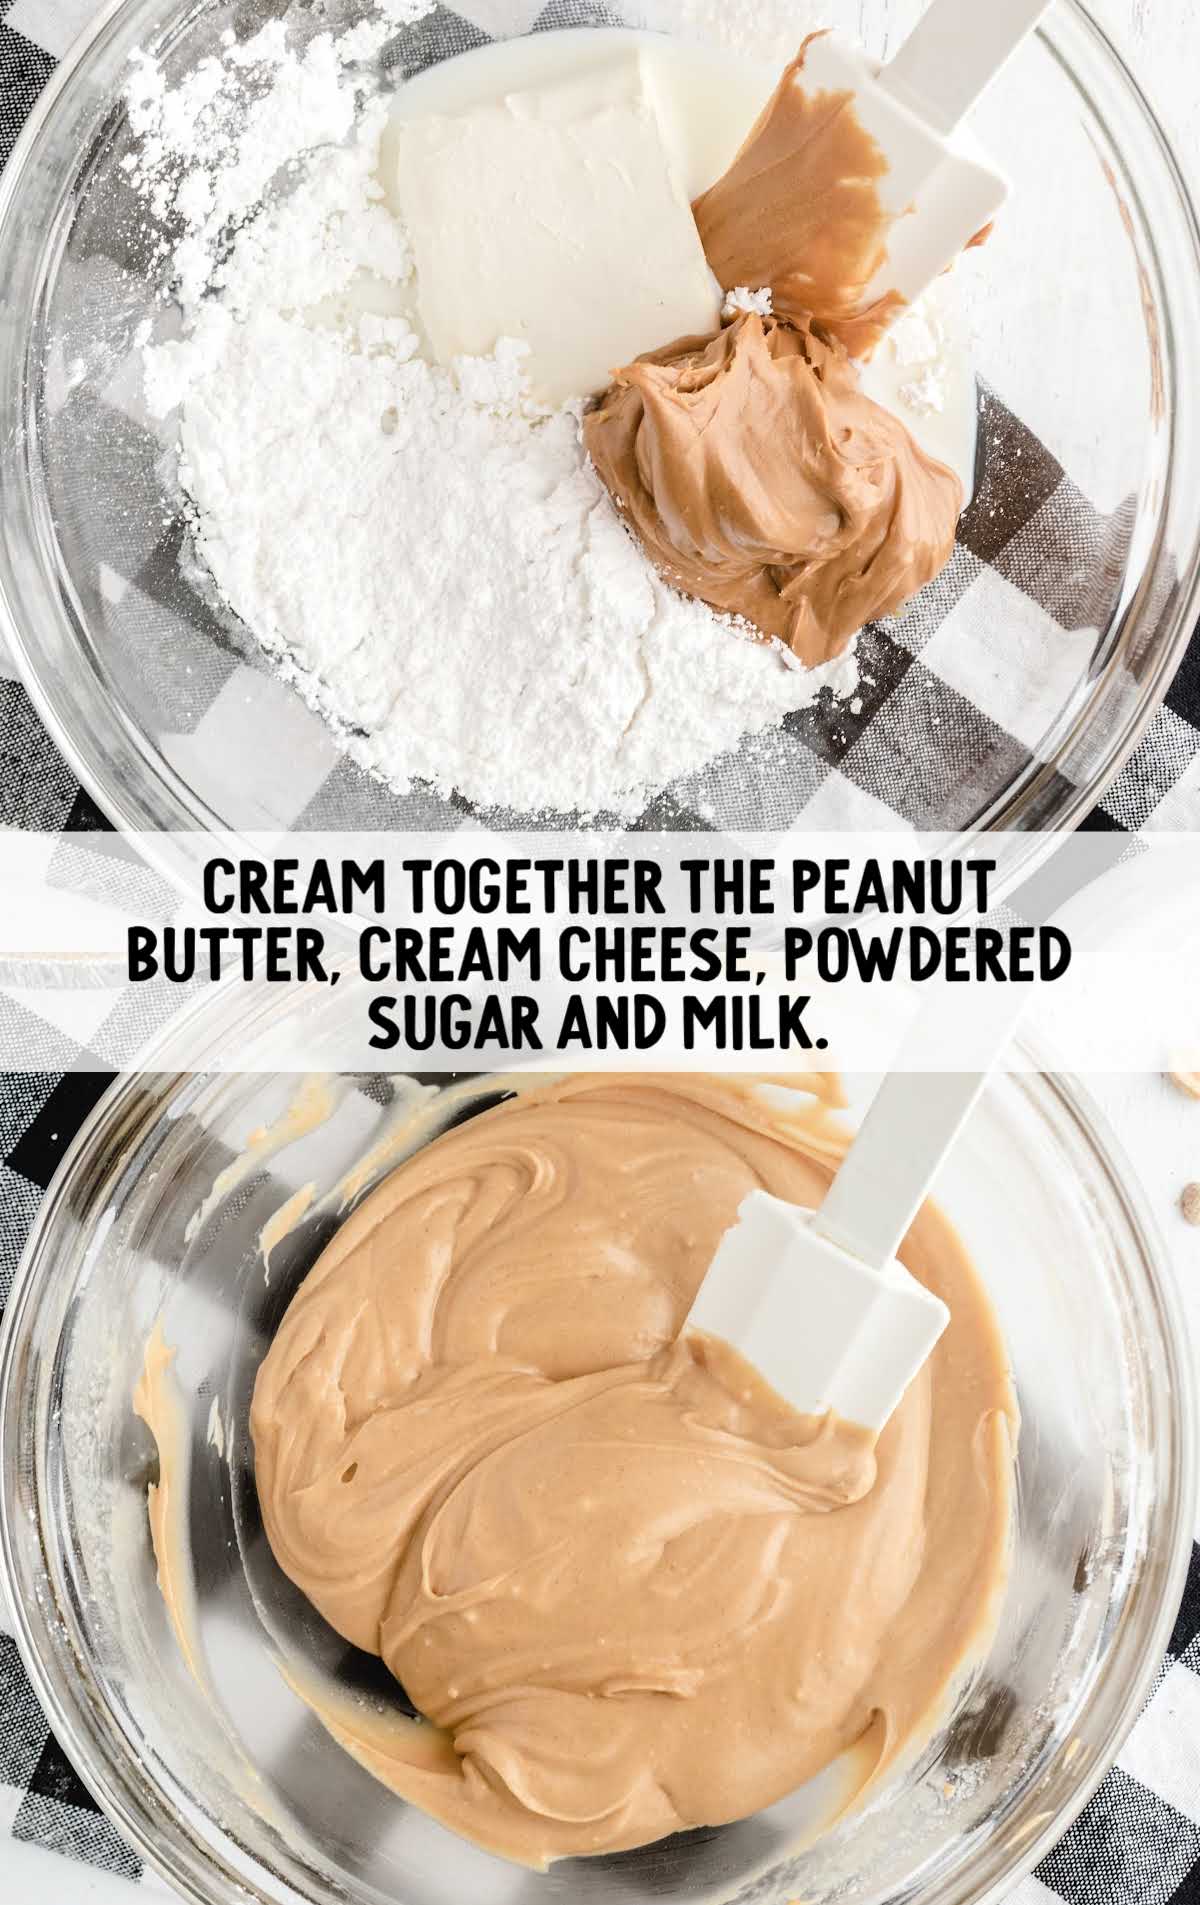 peanut butter, cream cheese, powdered sugar and milk creamed together